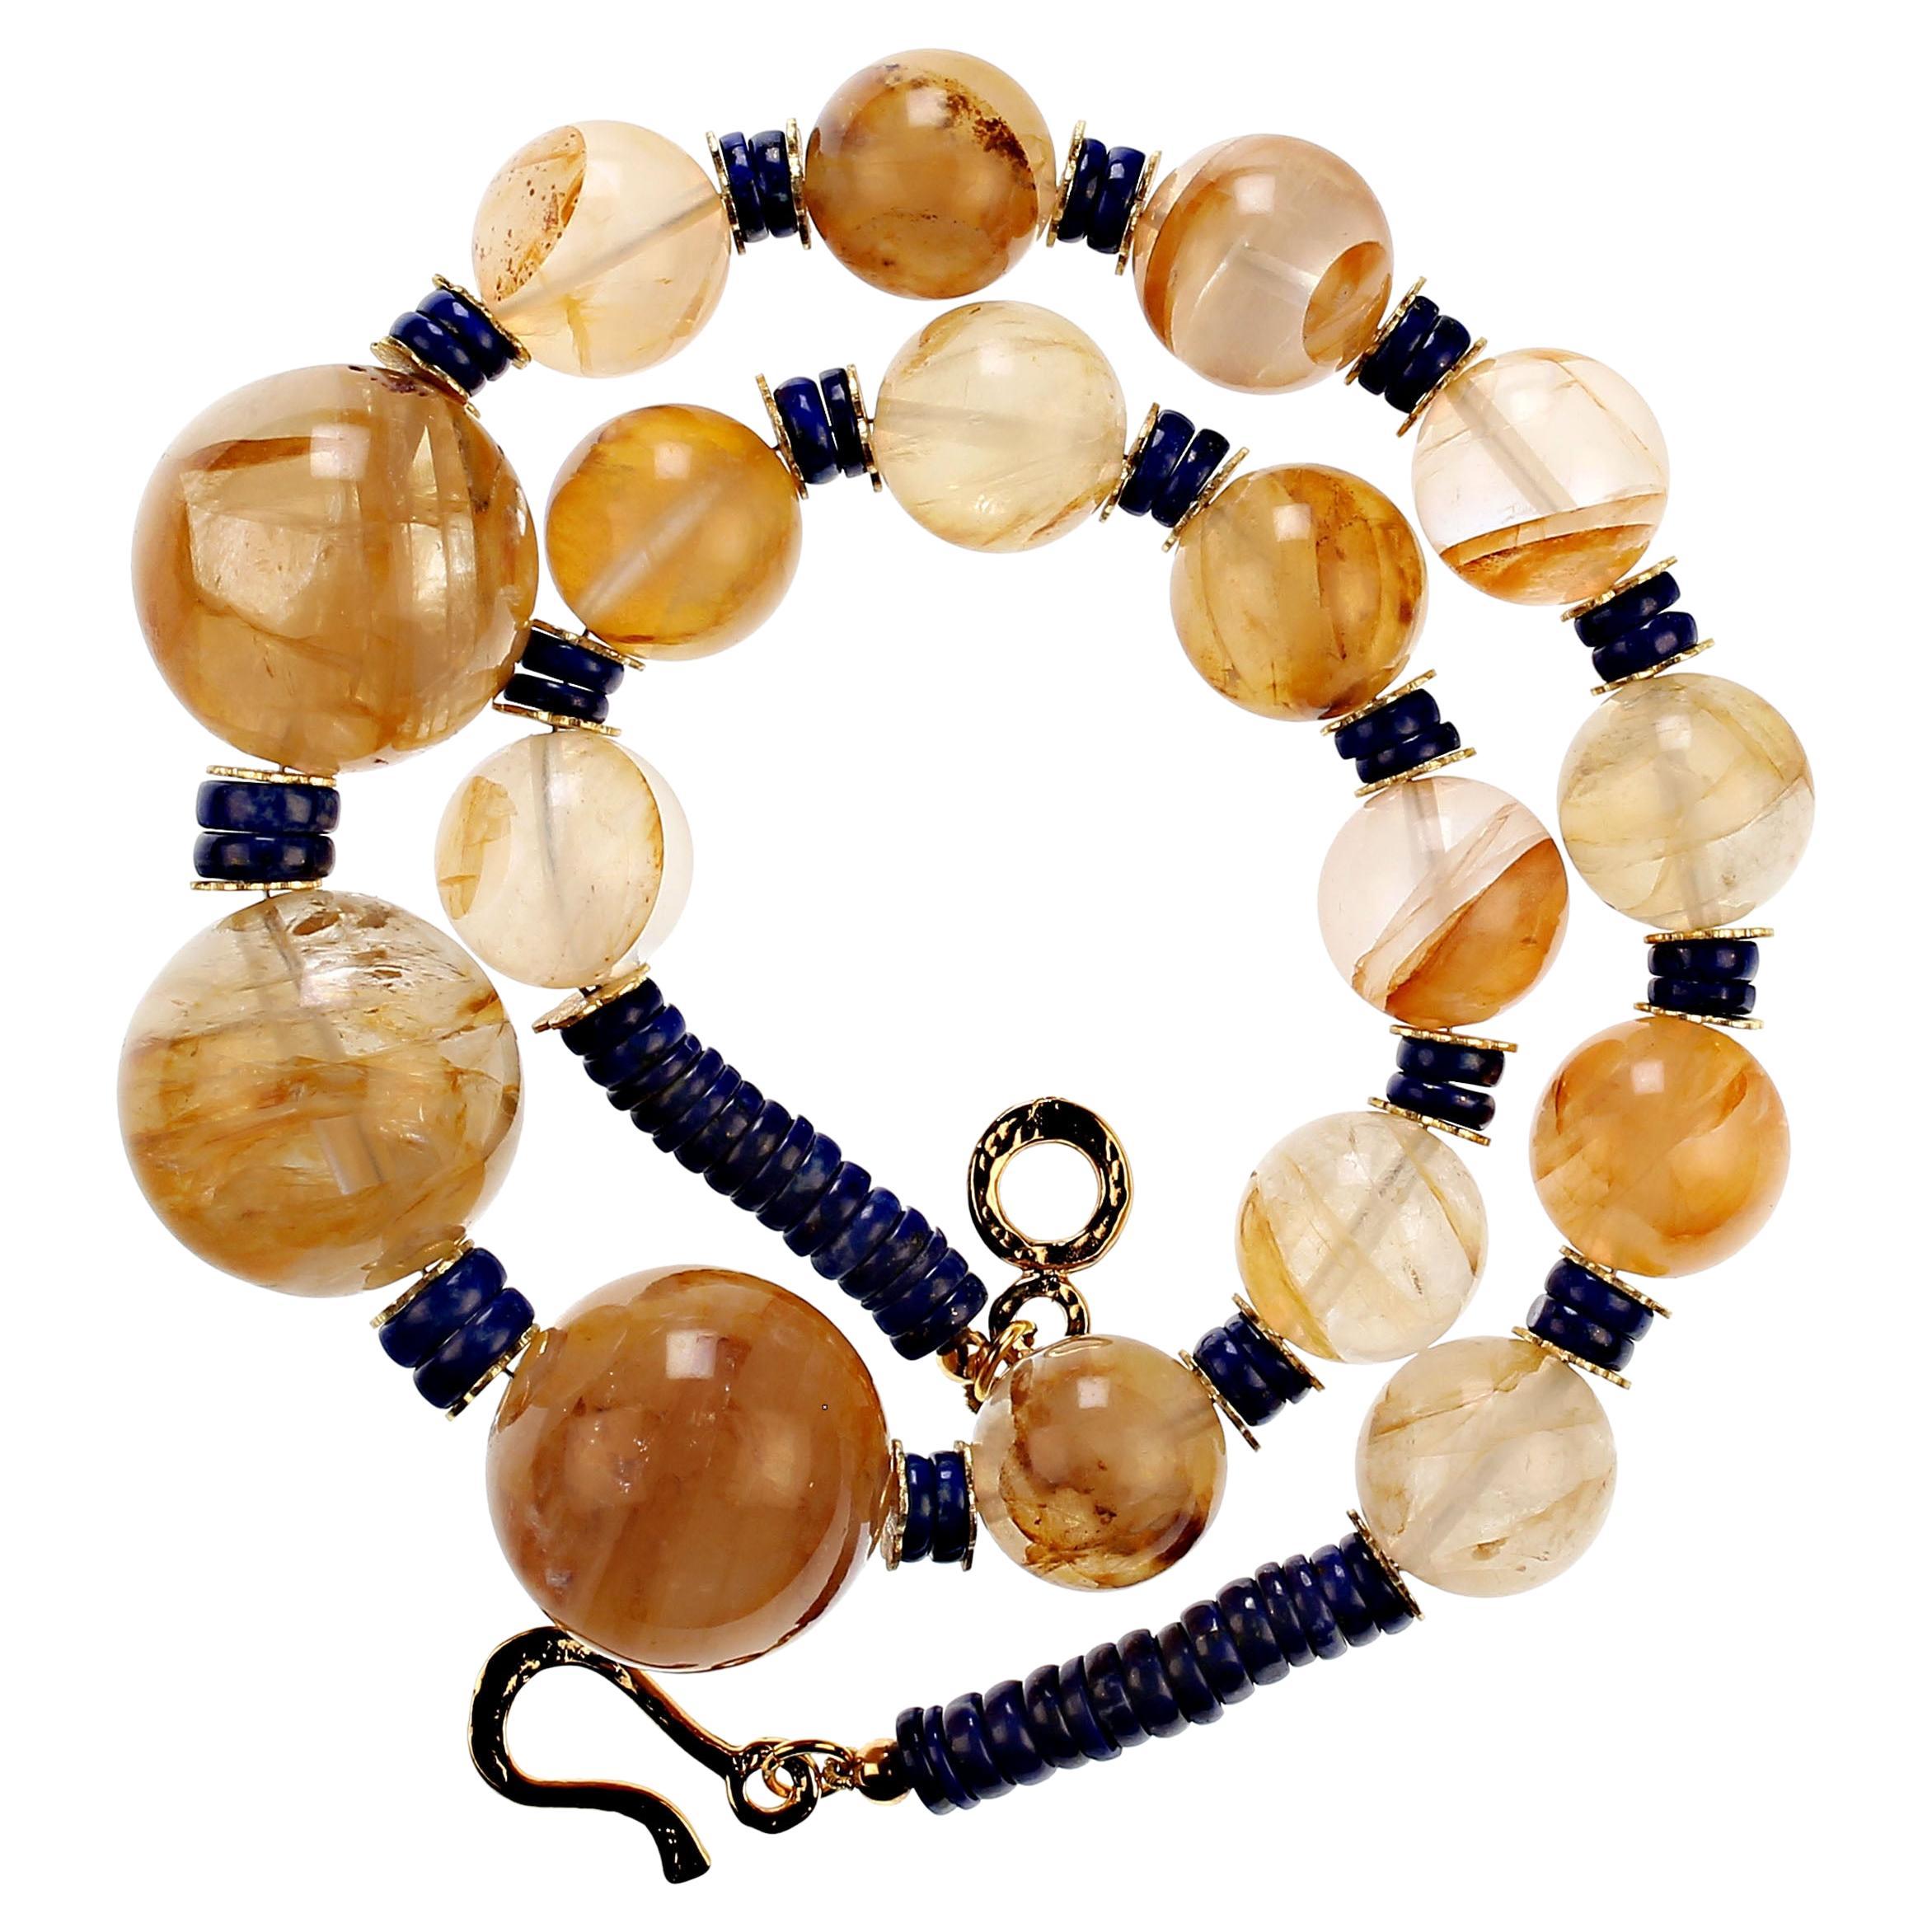 AJD 20 Inch  Golden Quartz and Lapis Lazuli Necklace  Great Gift!! For Sale